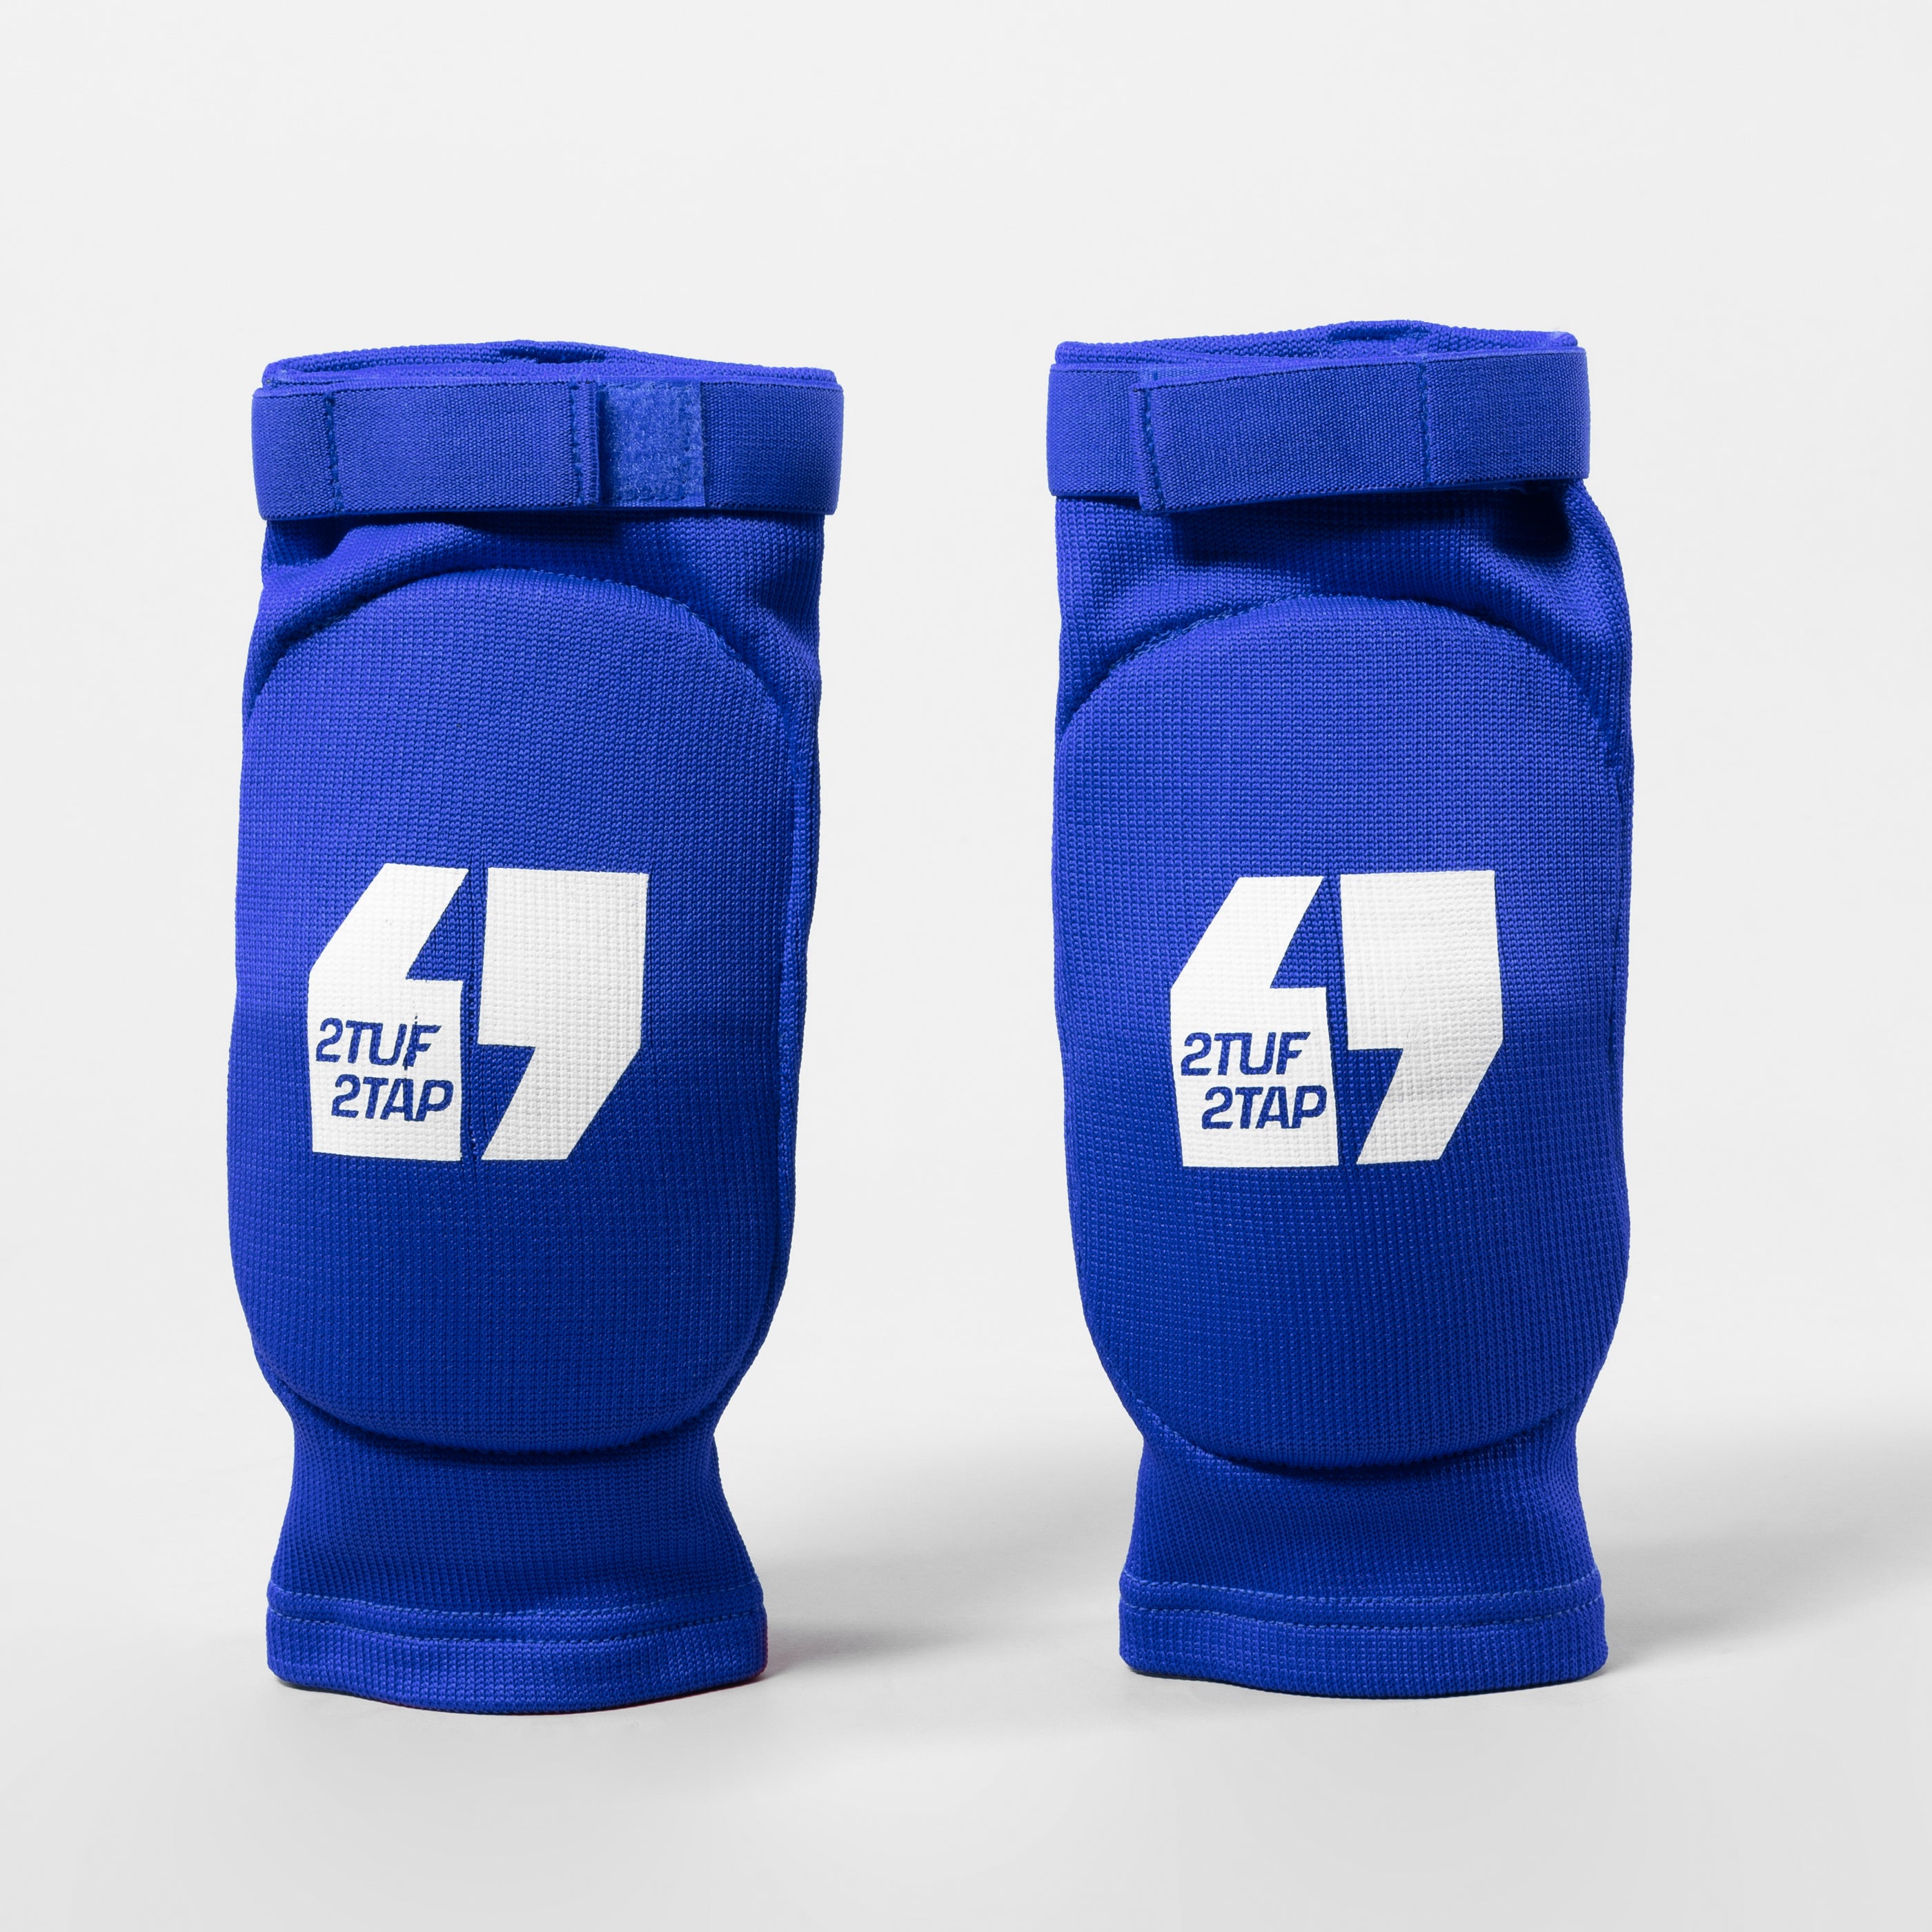 'Pro-Fit' Elbow/Knee Supporting Pads - Blue/White 2TUF2TAP